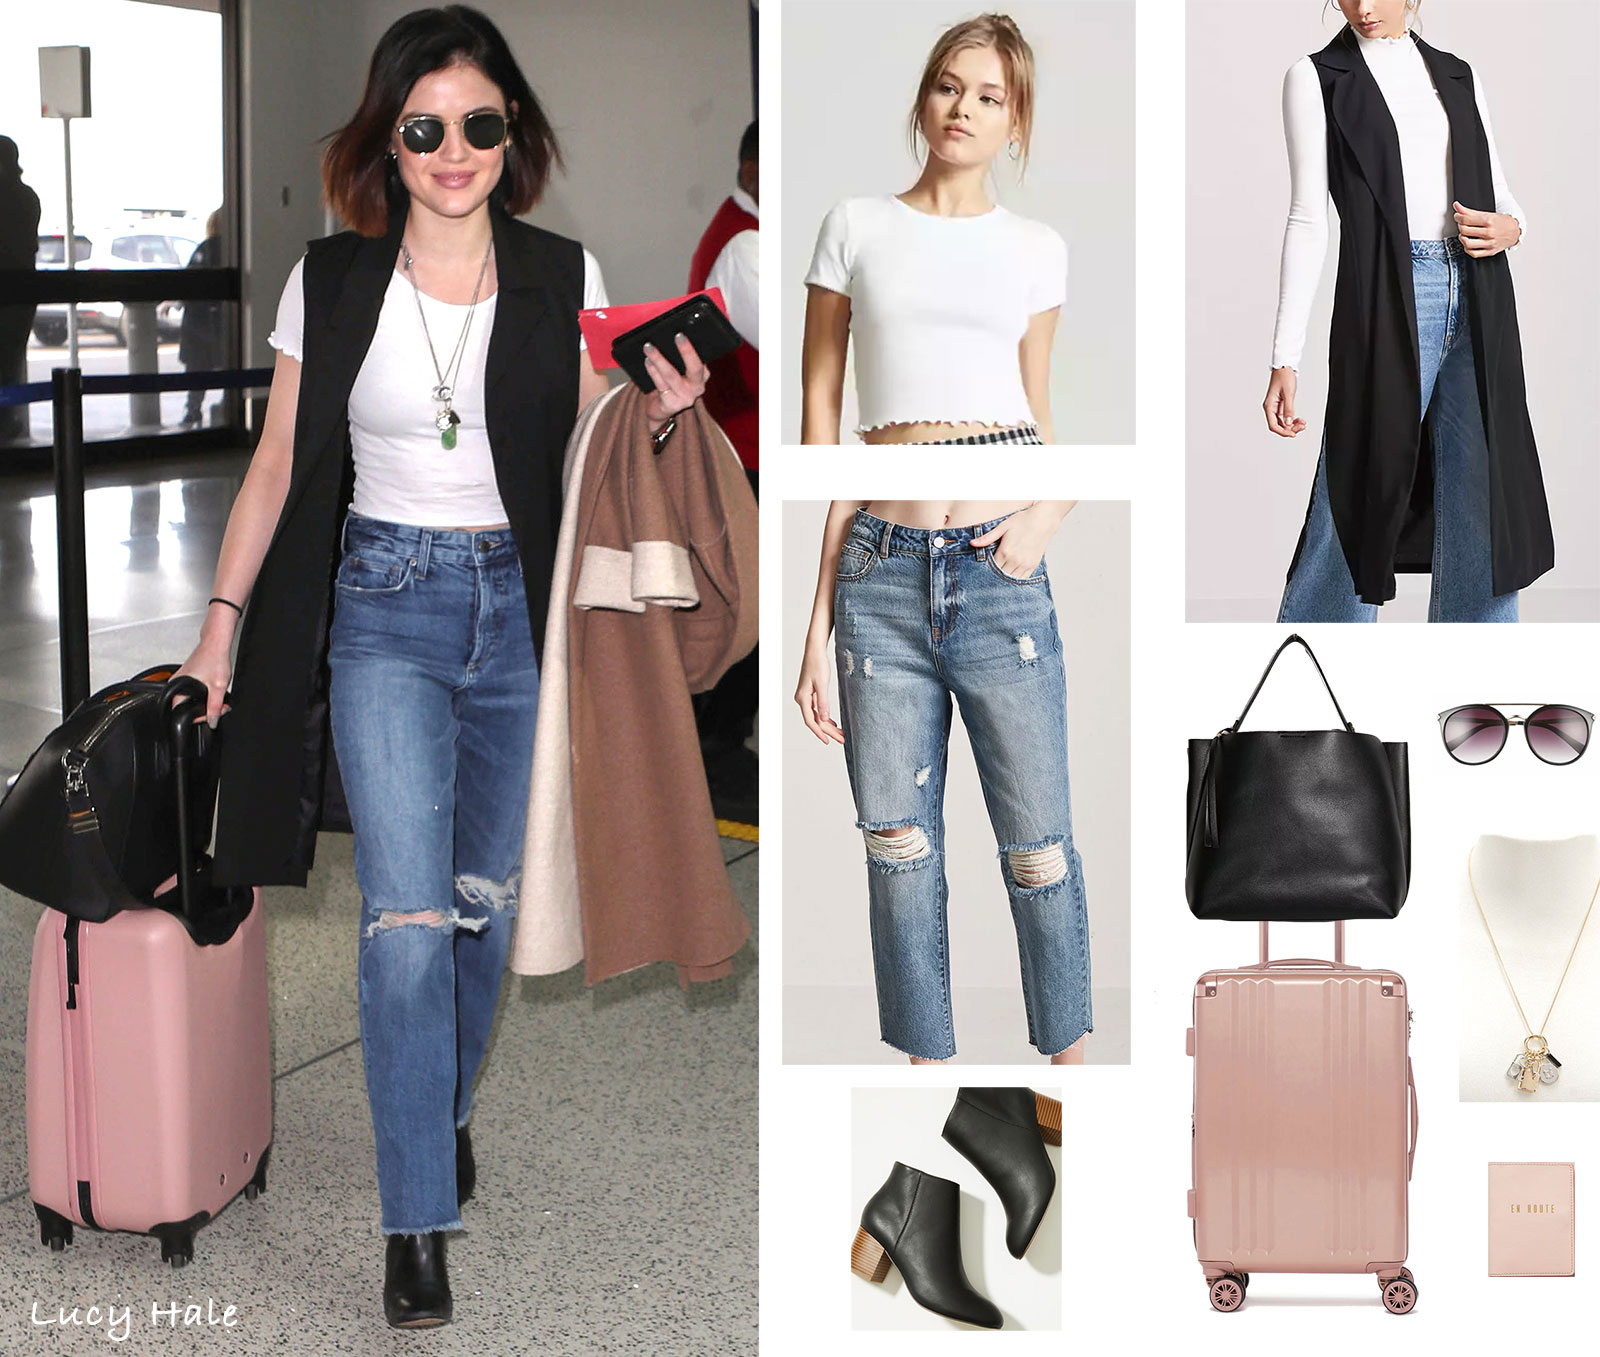 Lucy Hale wears a white tee, black longline vest and boyfriend jeans while traveling through LAX.